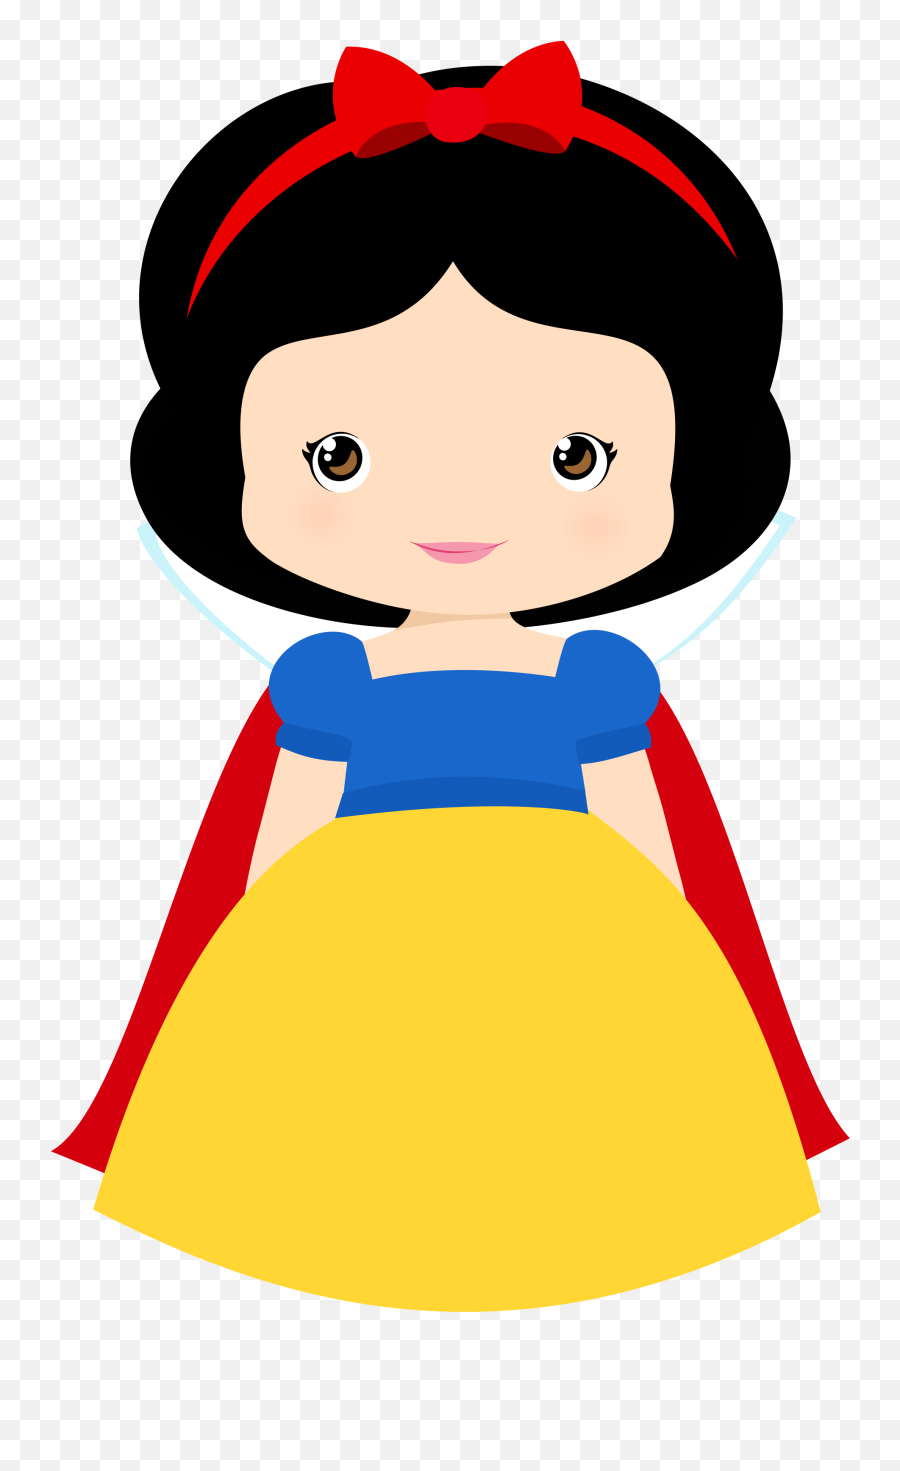 Baby Snow White Png 1 Image - Cute Snow White Clipart,Snow White Png